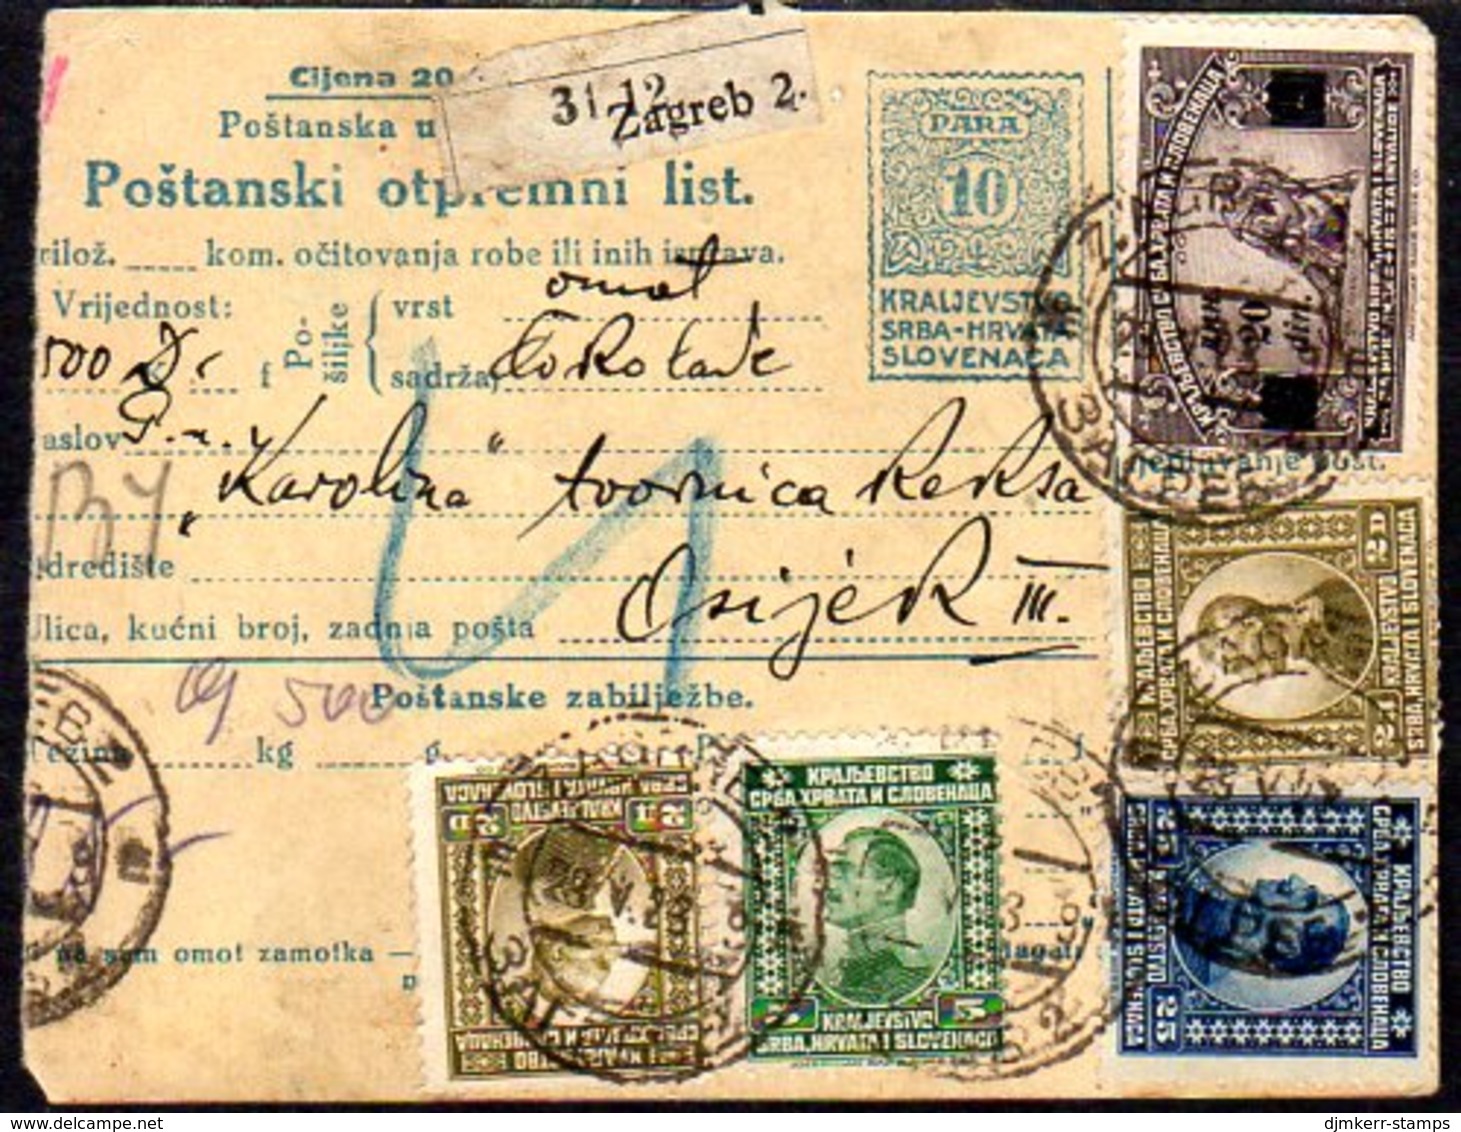 YUGOSLAVIA 1923 Parcel Card With Mixed Franking Including War Invalids 20 D. Surcharge - Covers & Documents